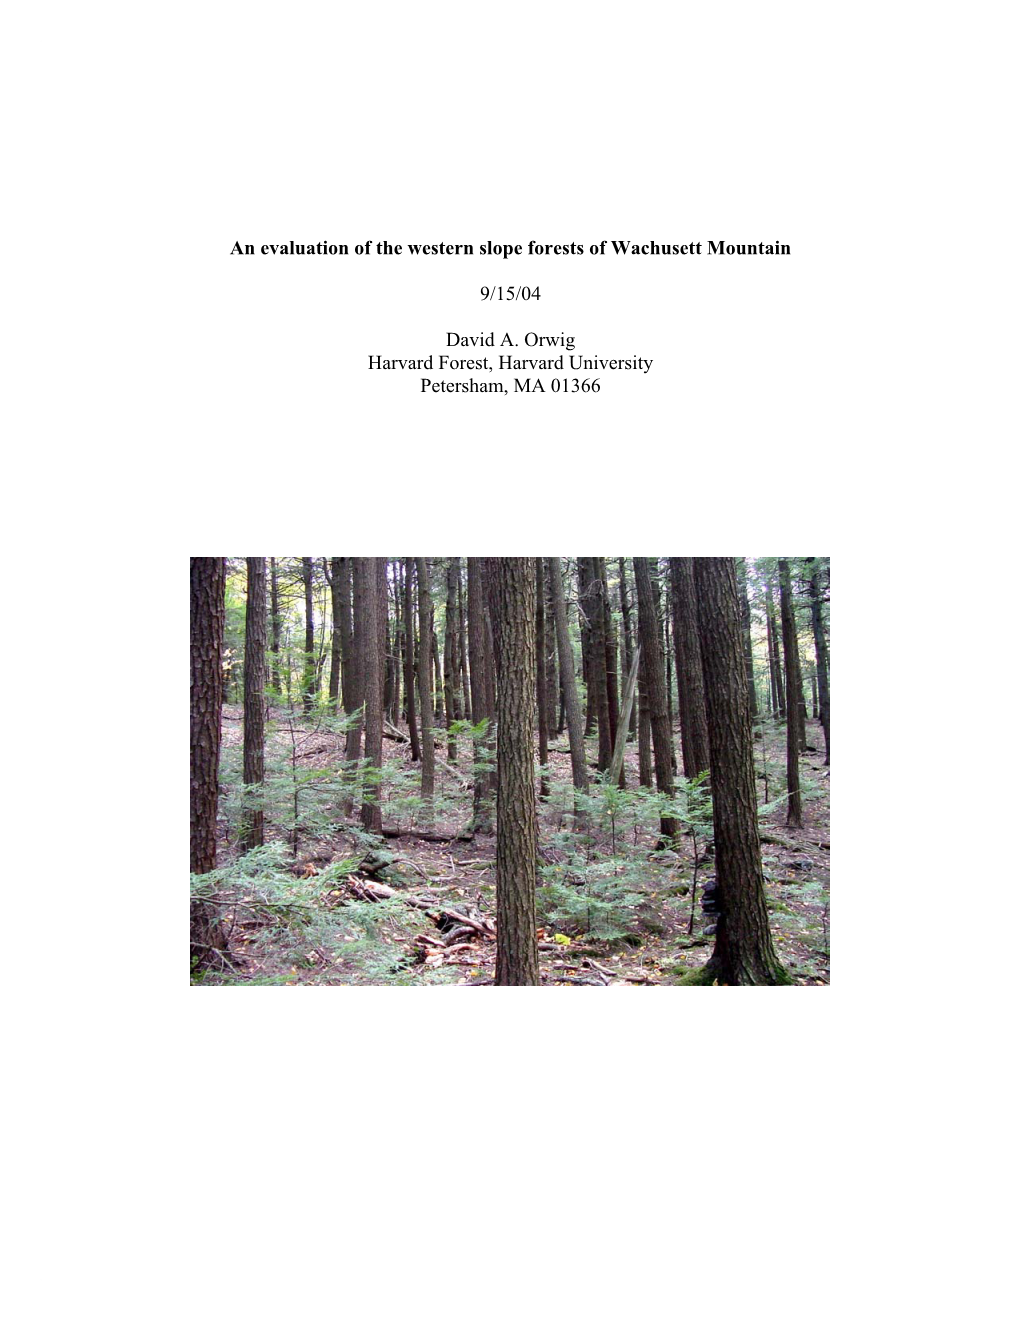 Proposal to Study the West Slope Forests of Wachusett Mountain